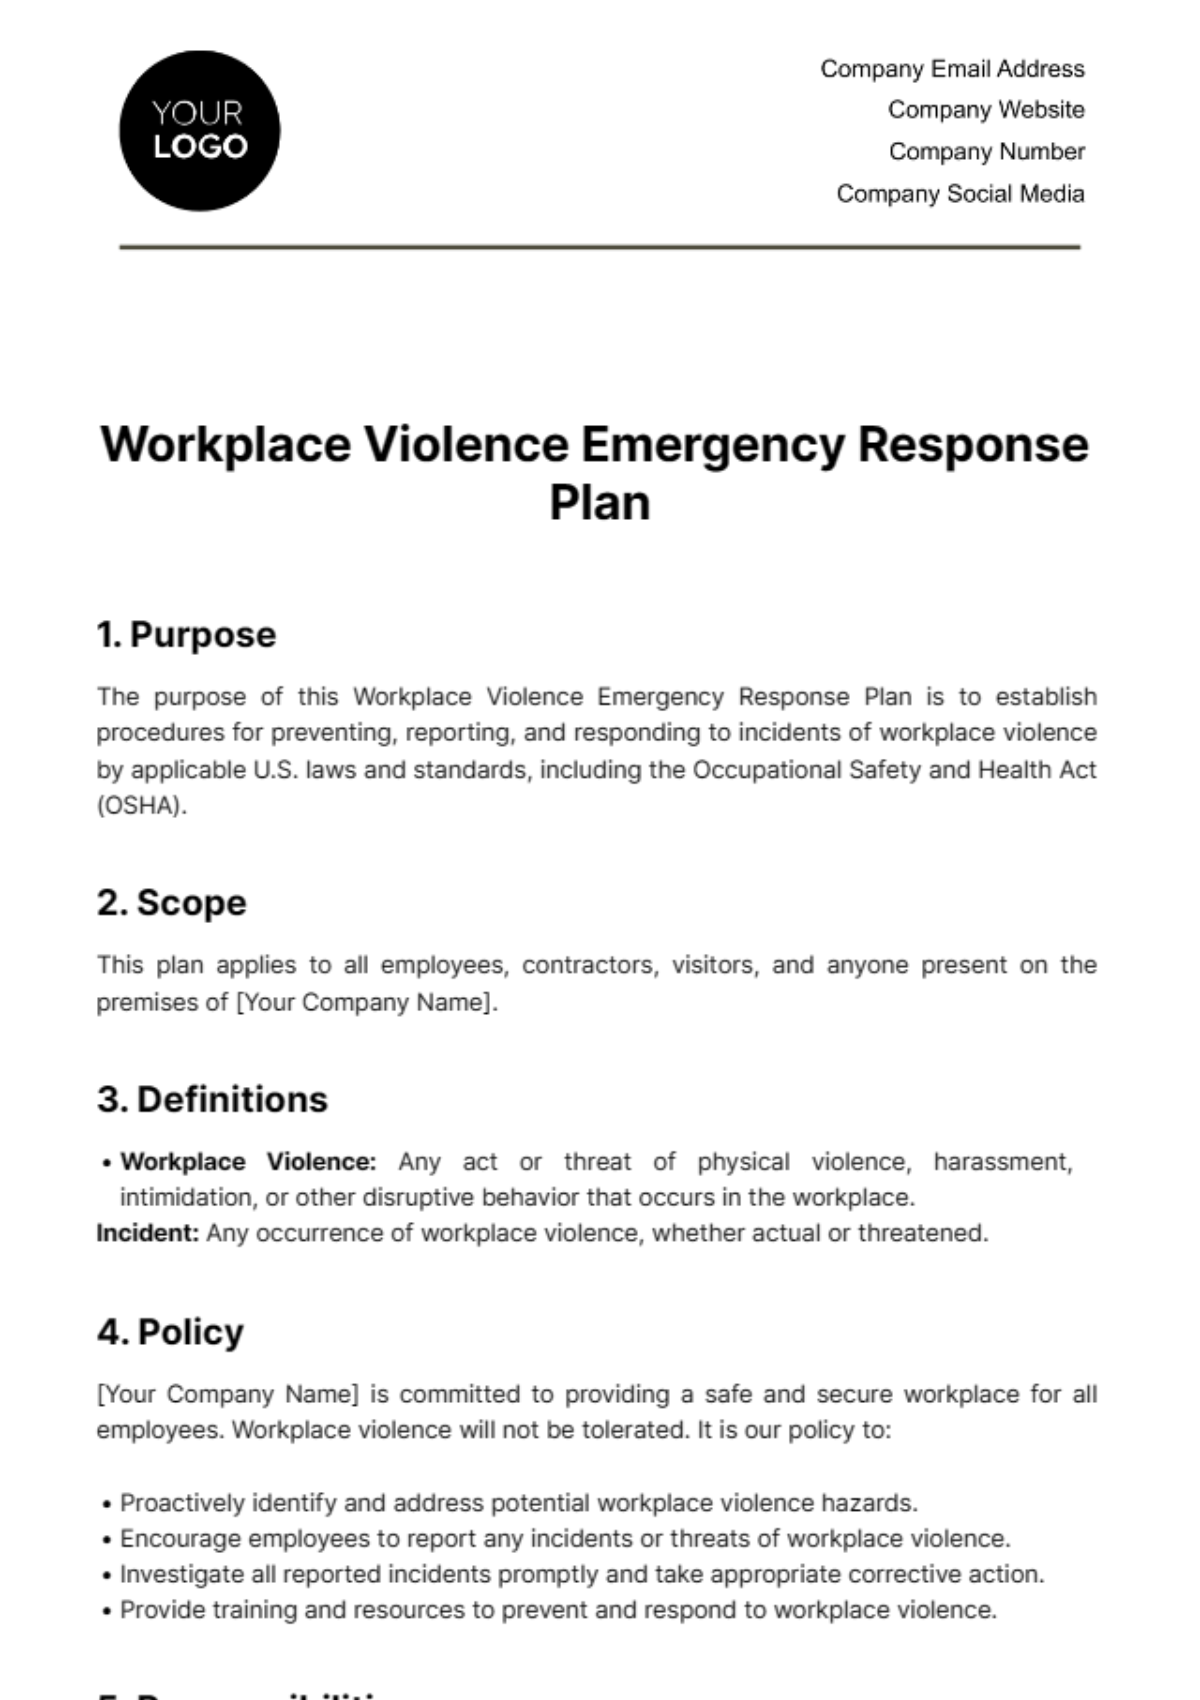 Free Workplace Violence Emergency Response Plan Template